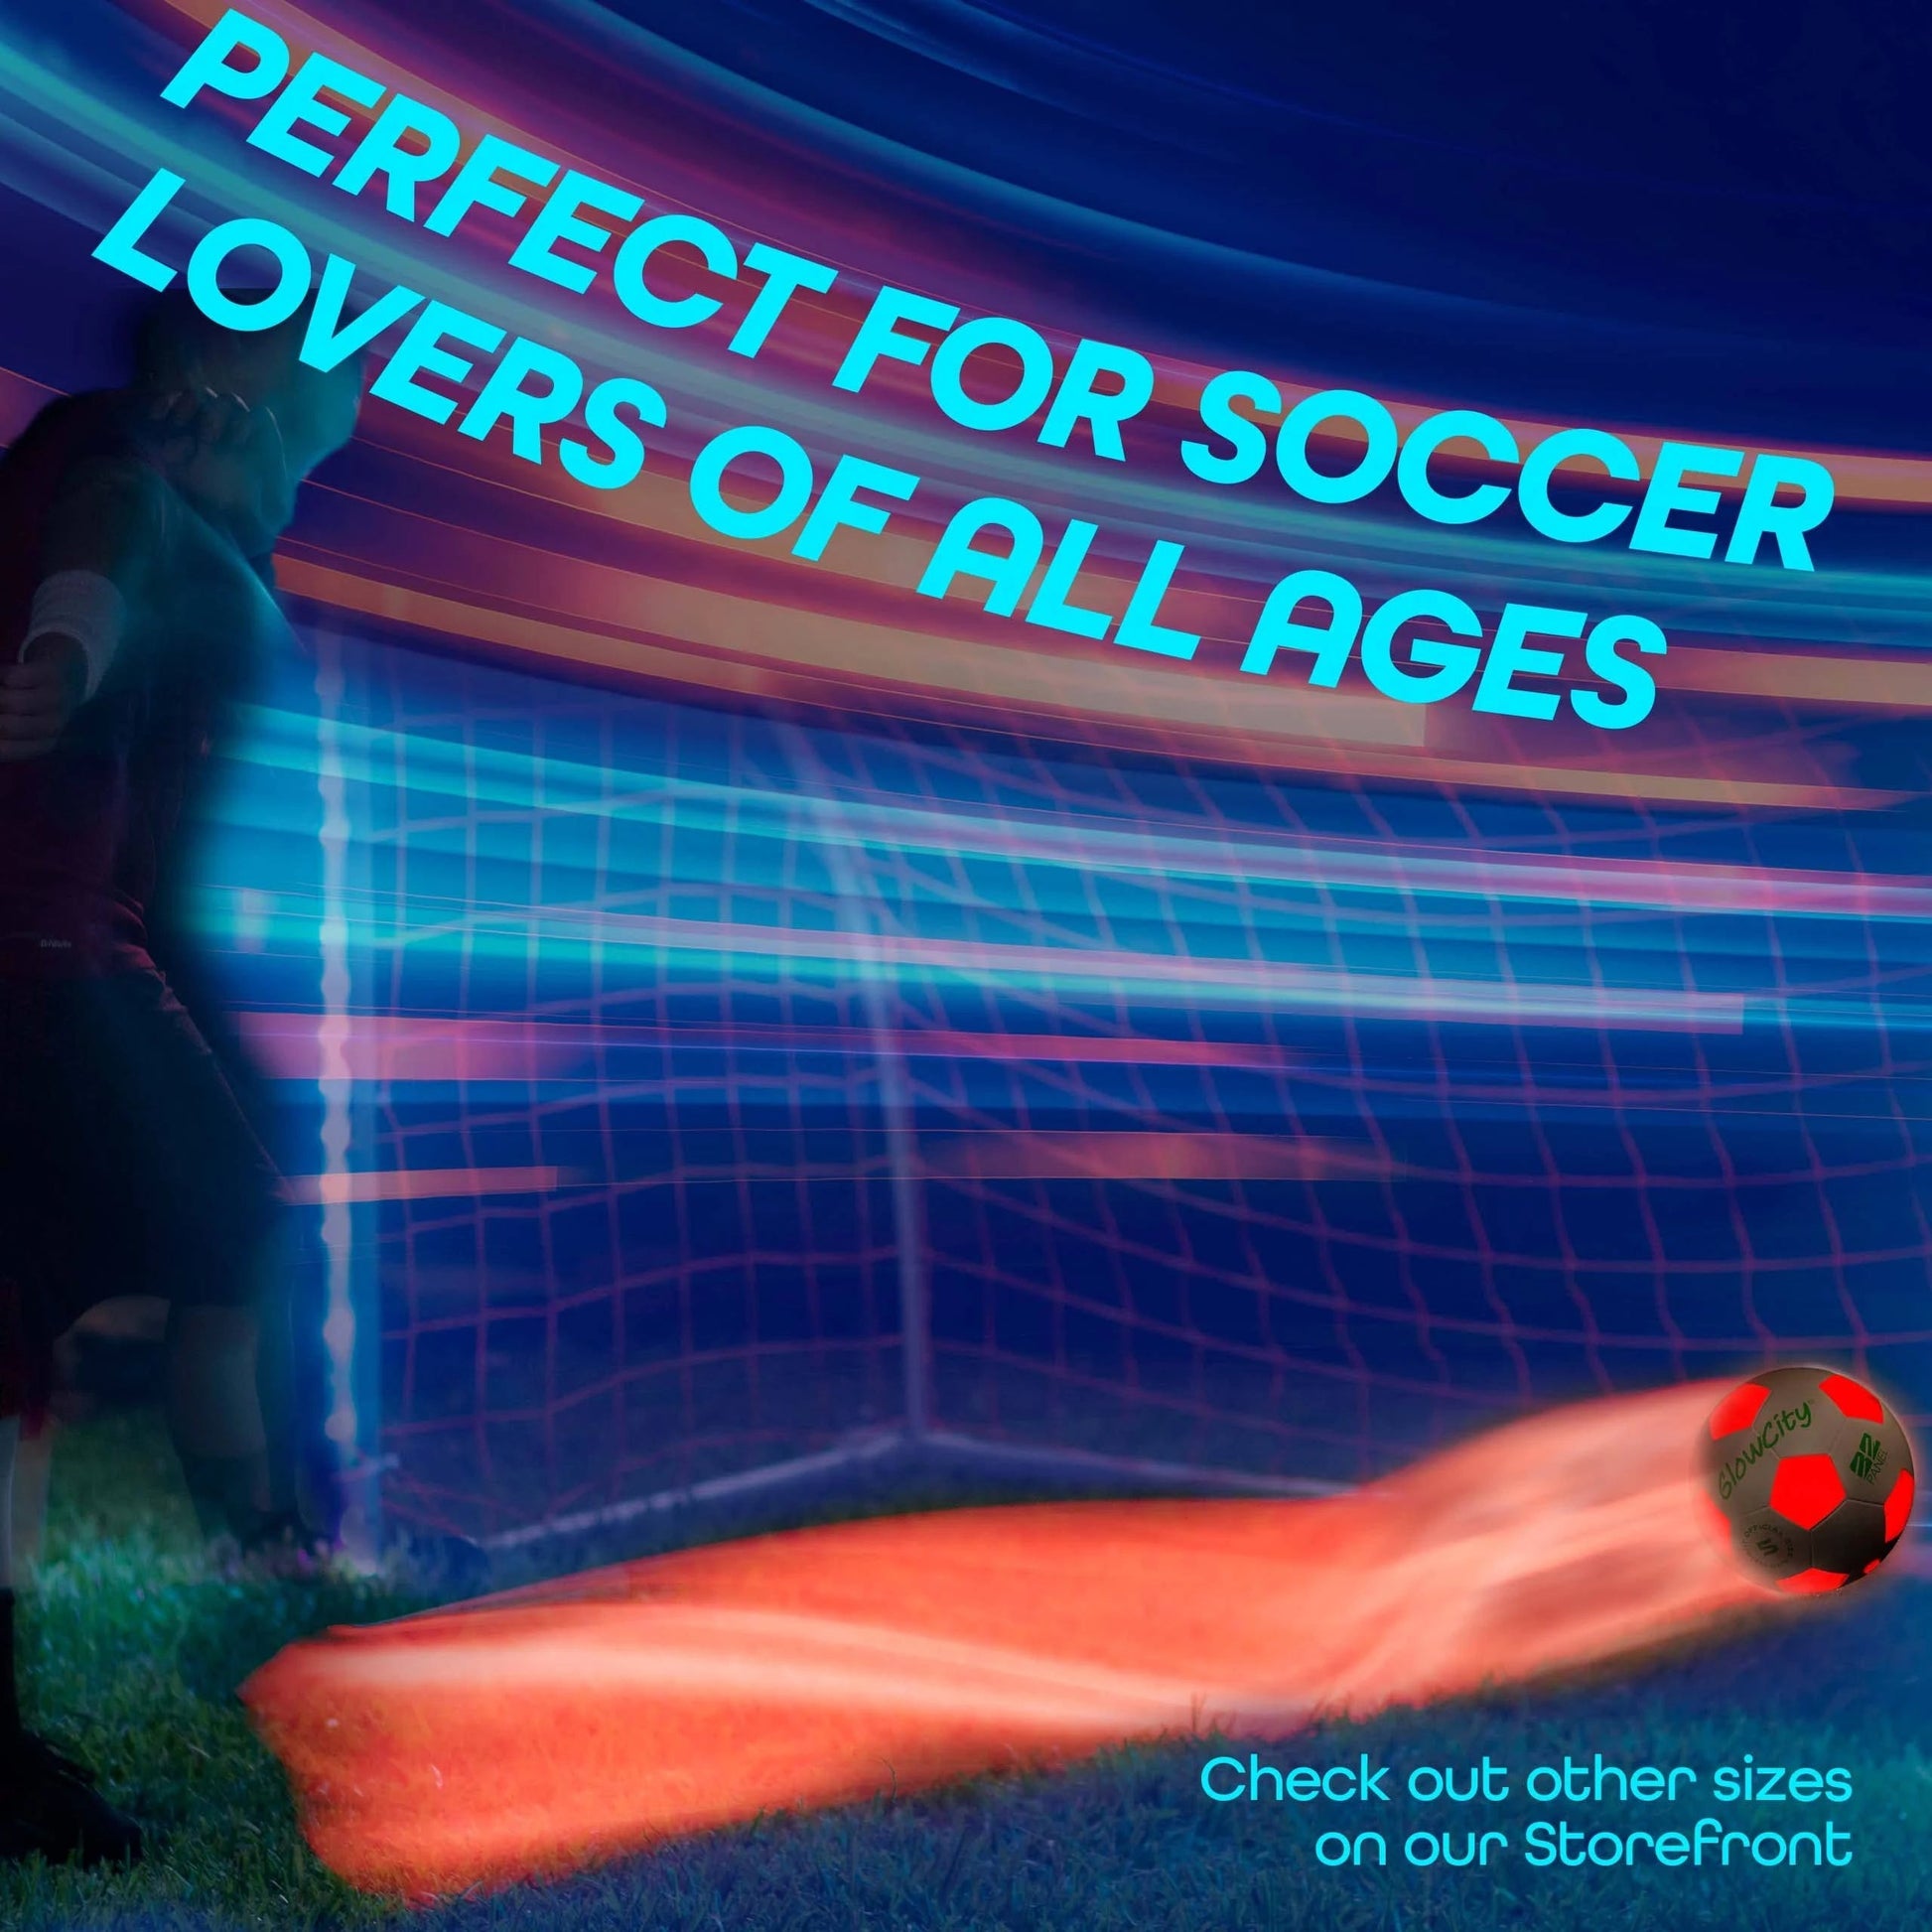 GlowCity Light up LED Soccer Ball - Blazing Red for sale online